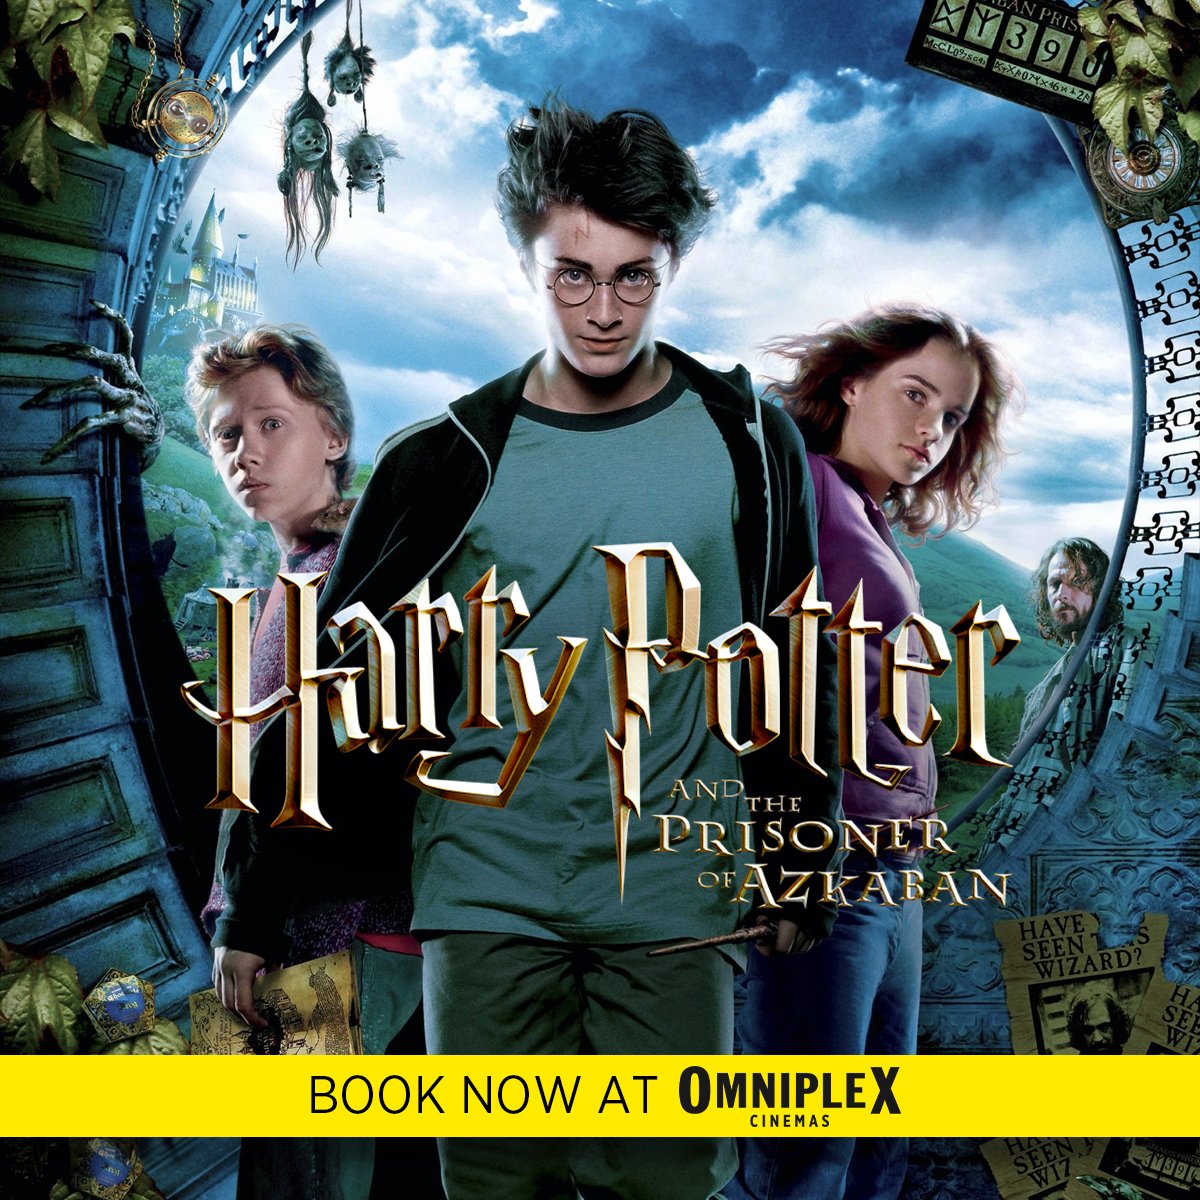 Harry Potter and the Prisoner of Azkaban @omniplexcinema @ClydeShopping Something Wicked This Way Comes. #HarryPotter and the Prisoner of Azkaban features in Omniplex Cinemas from Fri 31st May. Book Now: omniplexcinemas.co.uk/whatson/movie/…